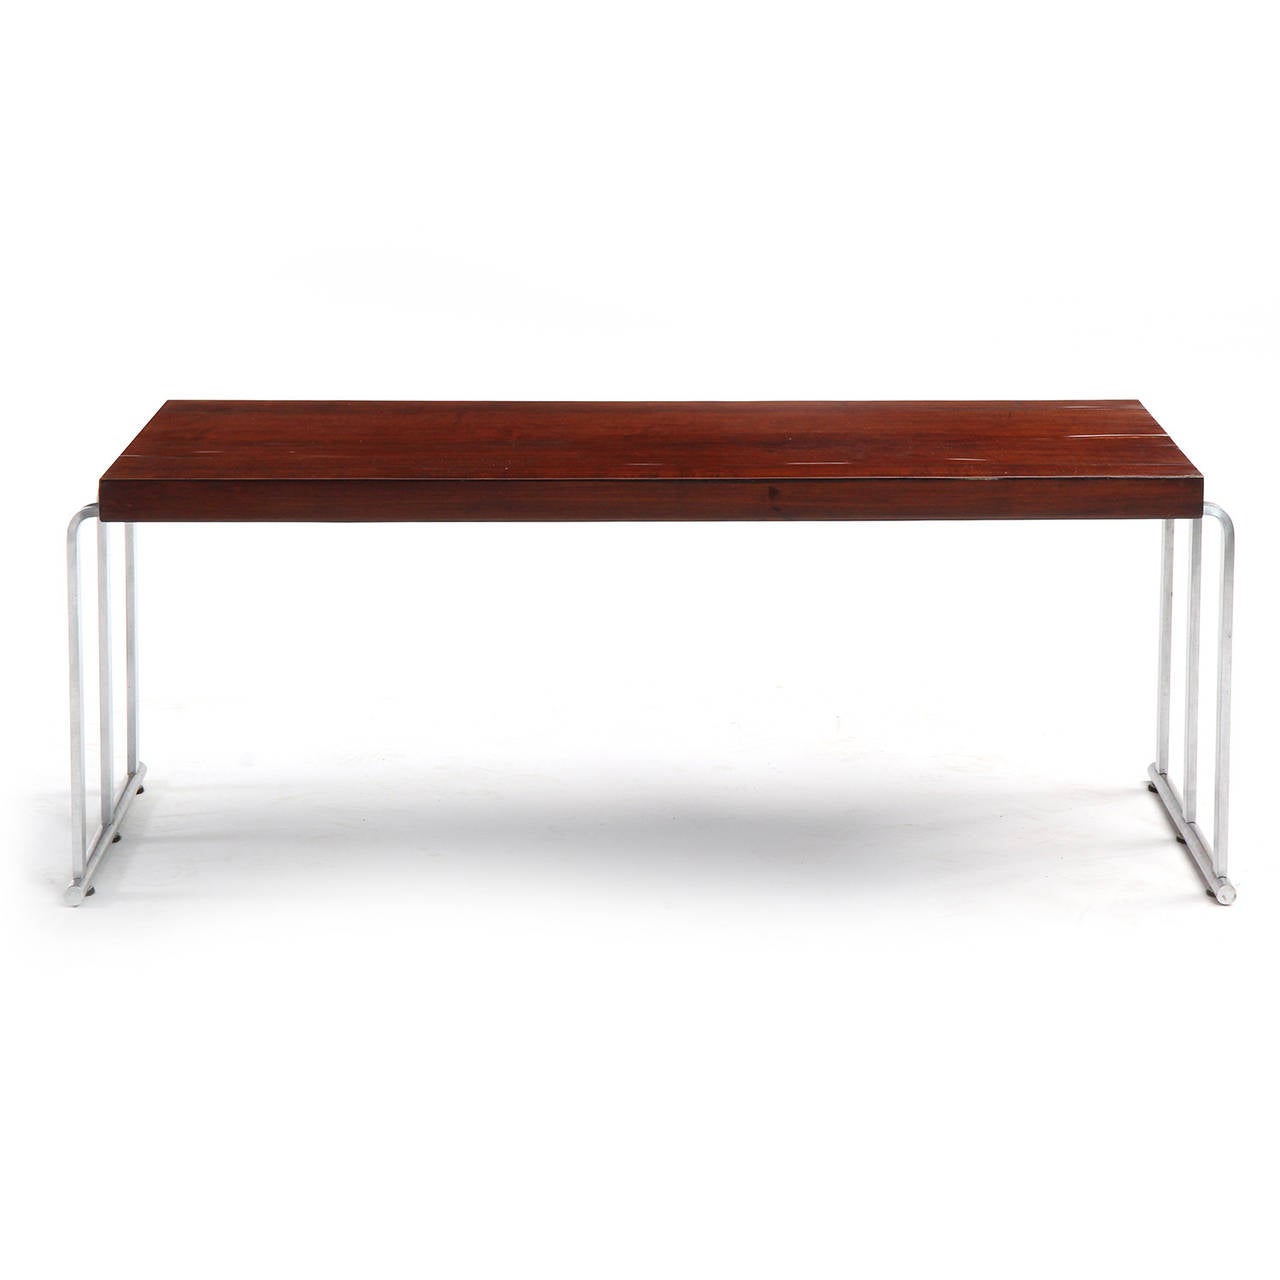 A low table or bench with a rectangular mahogany top floating a bent chromed steel base with sled feet.